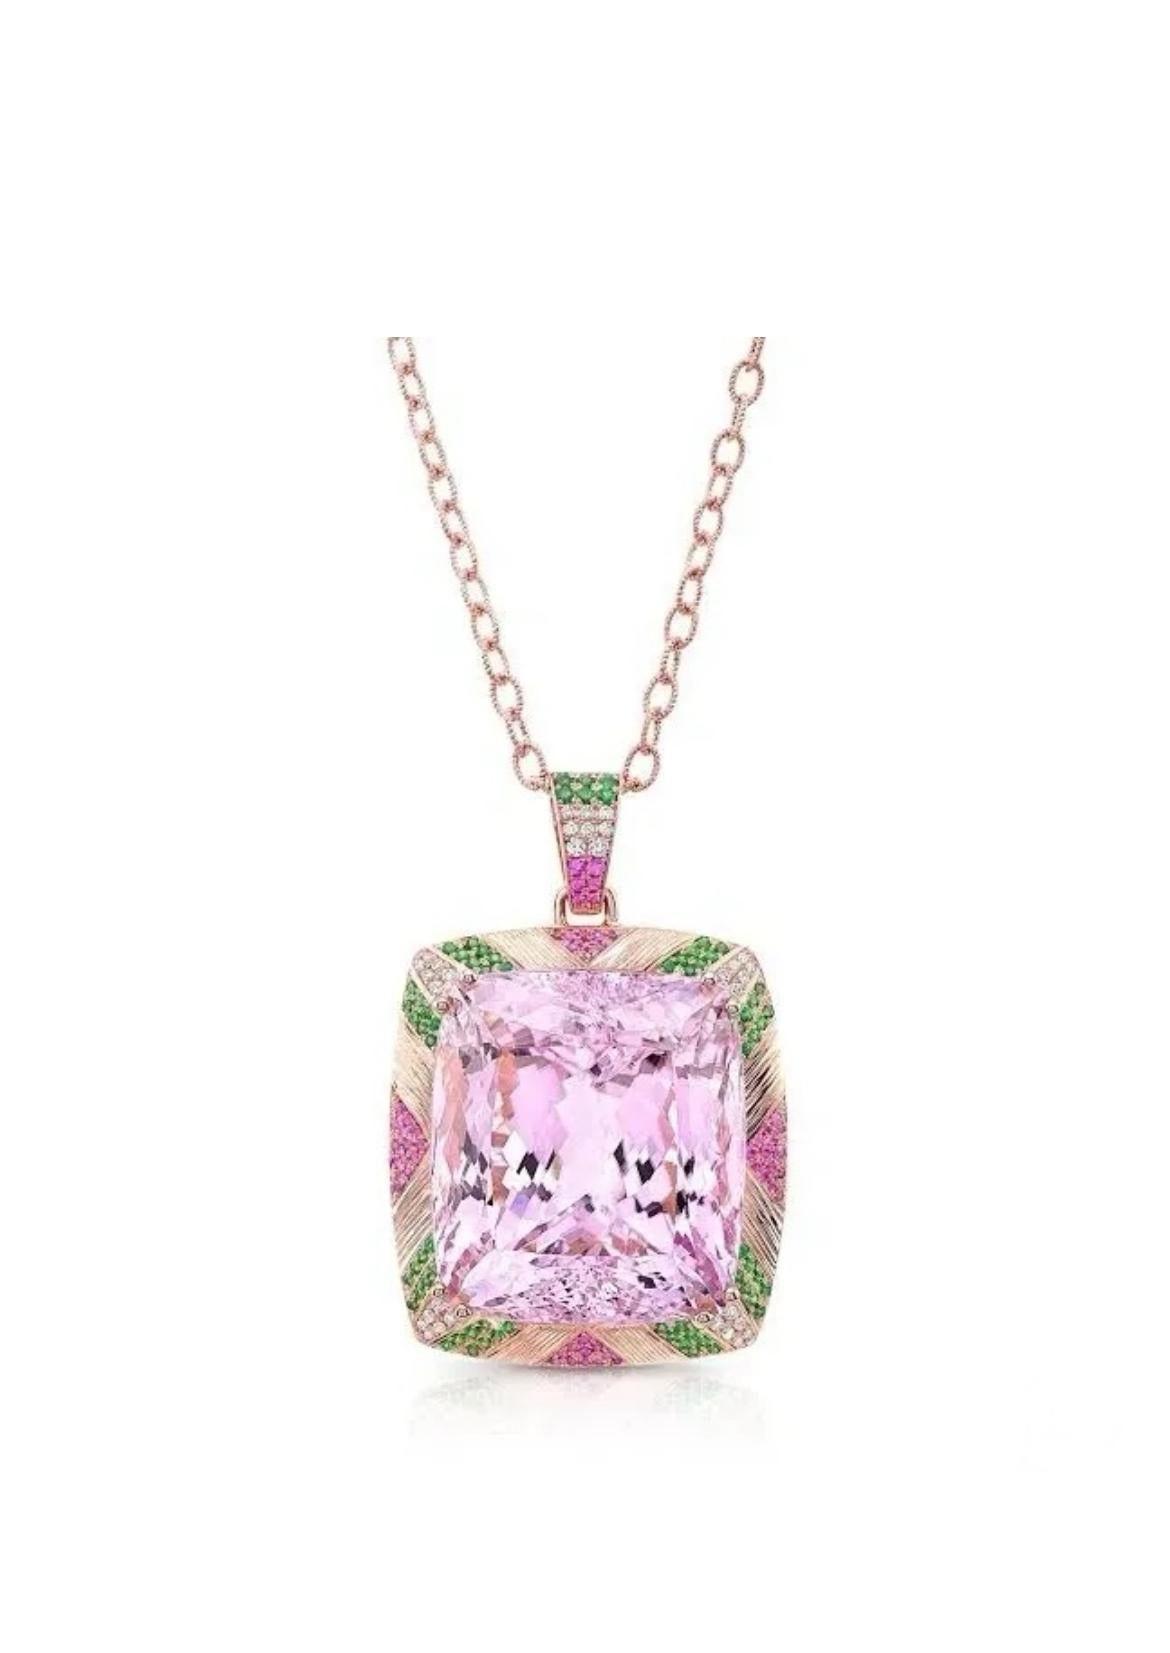 18K rose gold pendant, featuring an opulent 132-carat cushion-cut Pink Kunzite, adorned by Pink Sapphires 0.67 cts, Tsavorite Garnets 1.01 cts and white shimmering diamonds 0.52 cts. 

In the years since, kunzite has proven to be a highly desirable